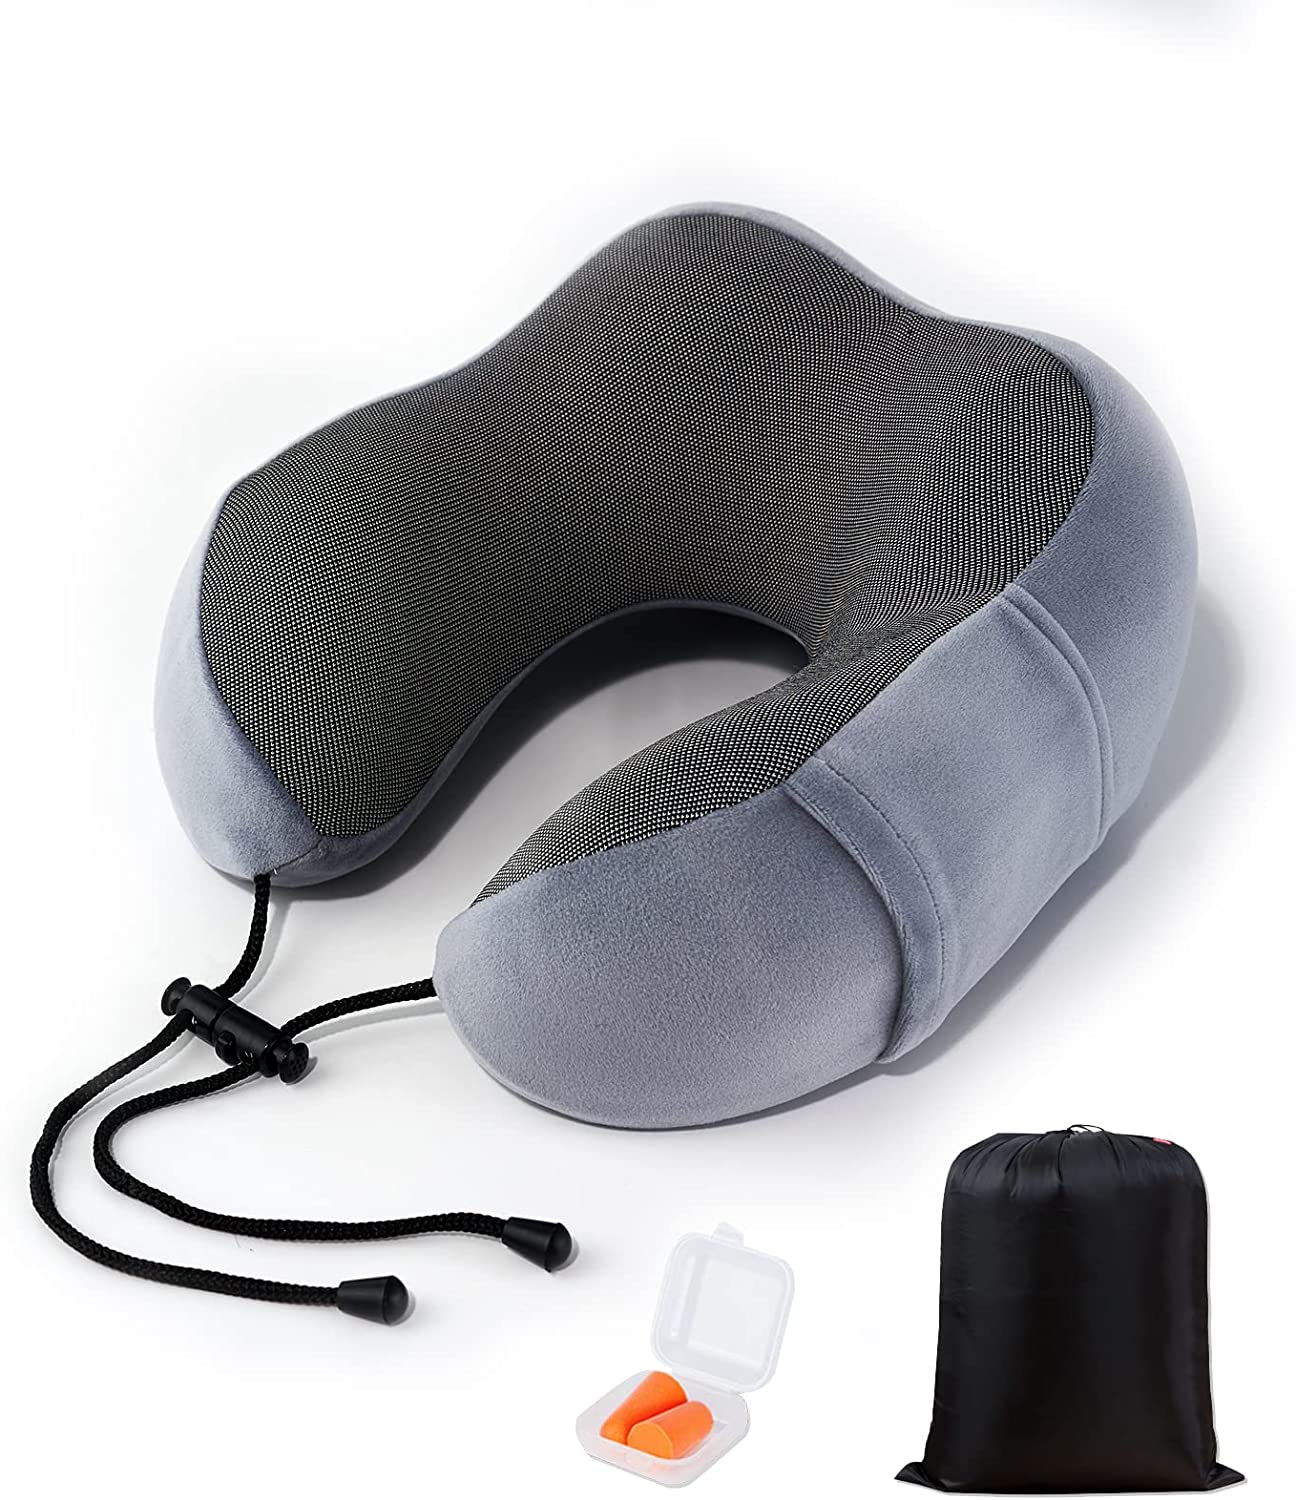 DS BS 4Pcs Airplane Travel Kit With Neck Pillow,Eye Masks,Earplugs-Grey